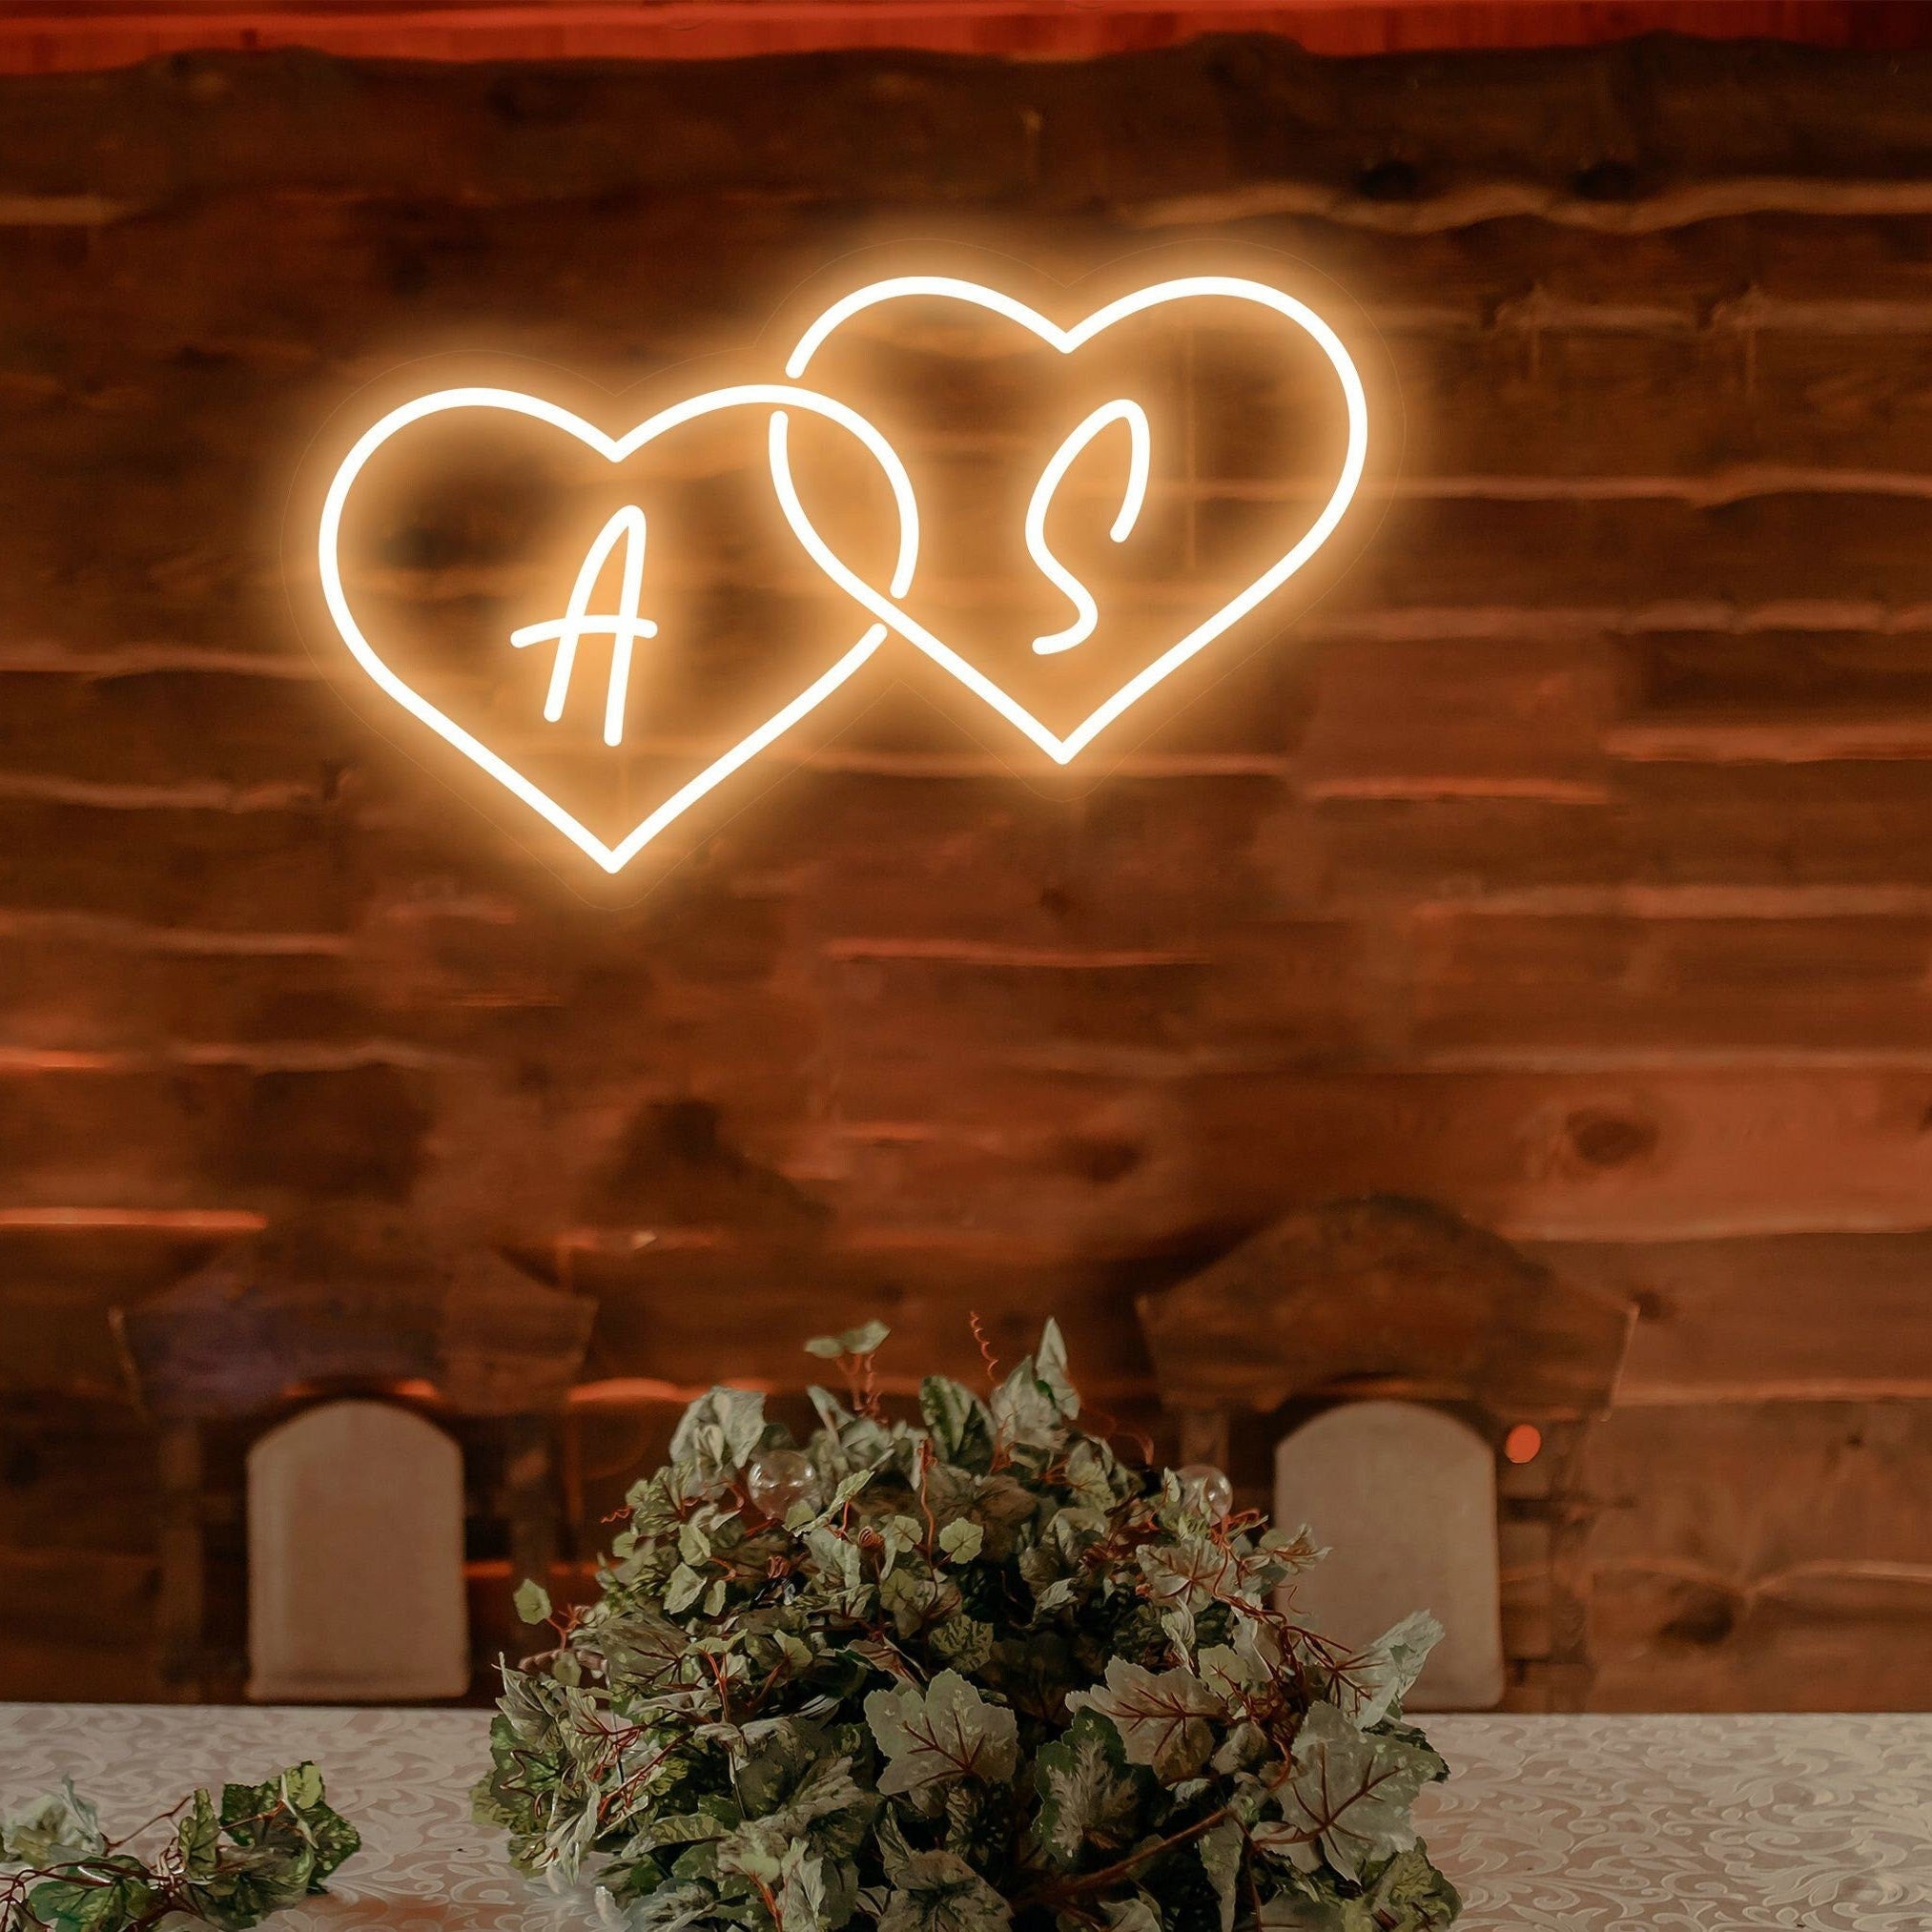 NEONIP-Personalized 100% Handmade Wedding LED Neon Sign with Heart to Heart and Your Initial Letters